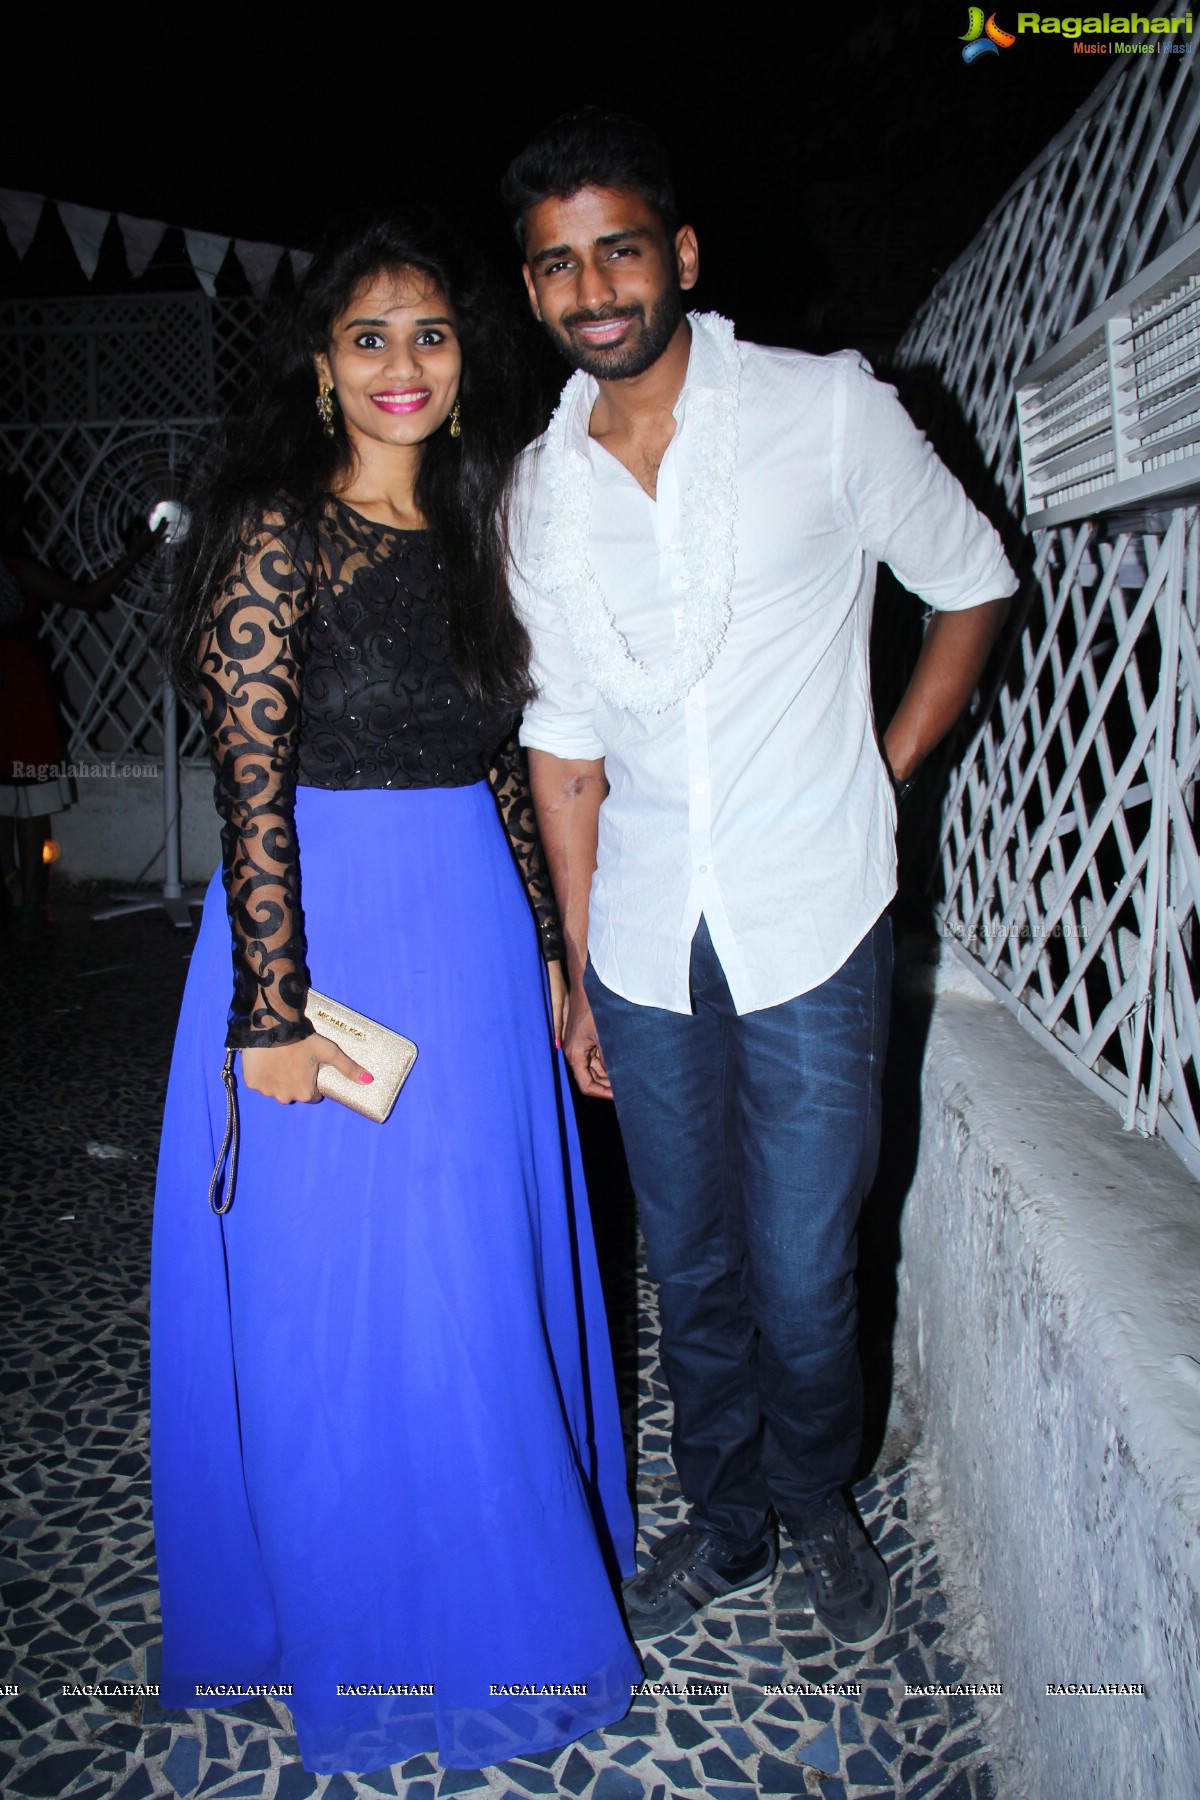 The New Year Whiteout - The New Year Party at Olive Bistro, Hyderabad